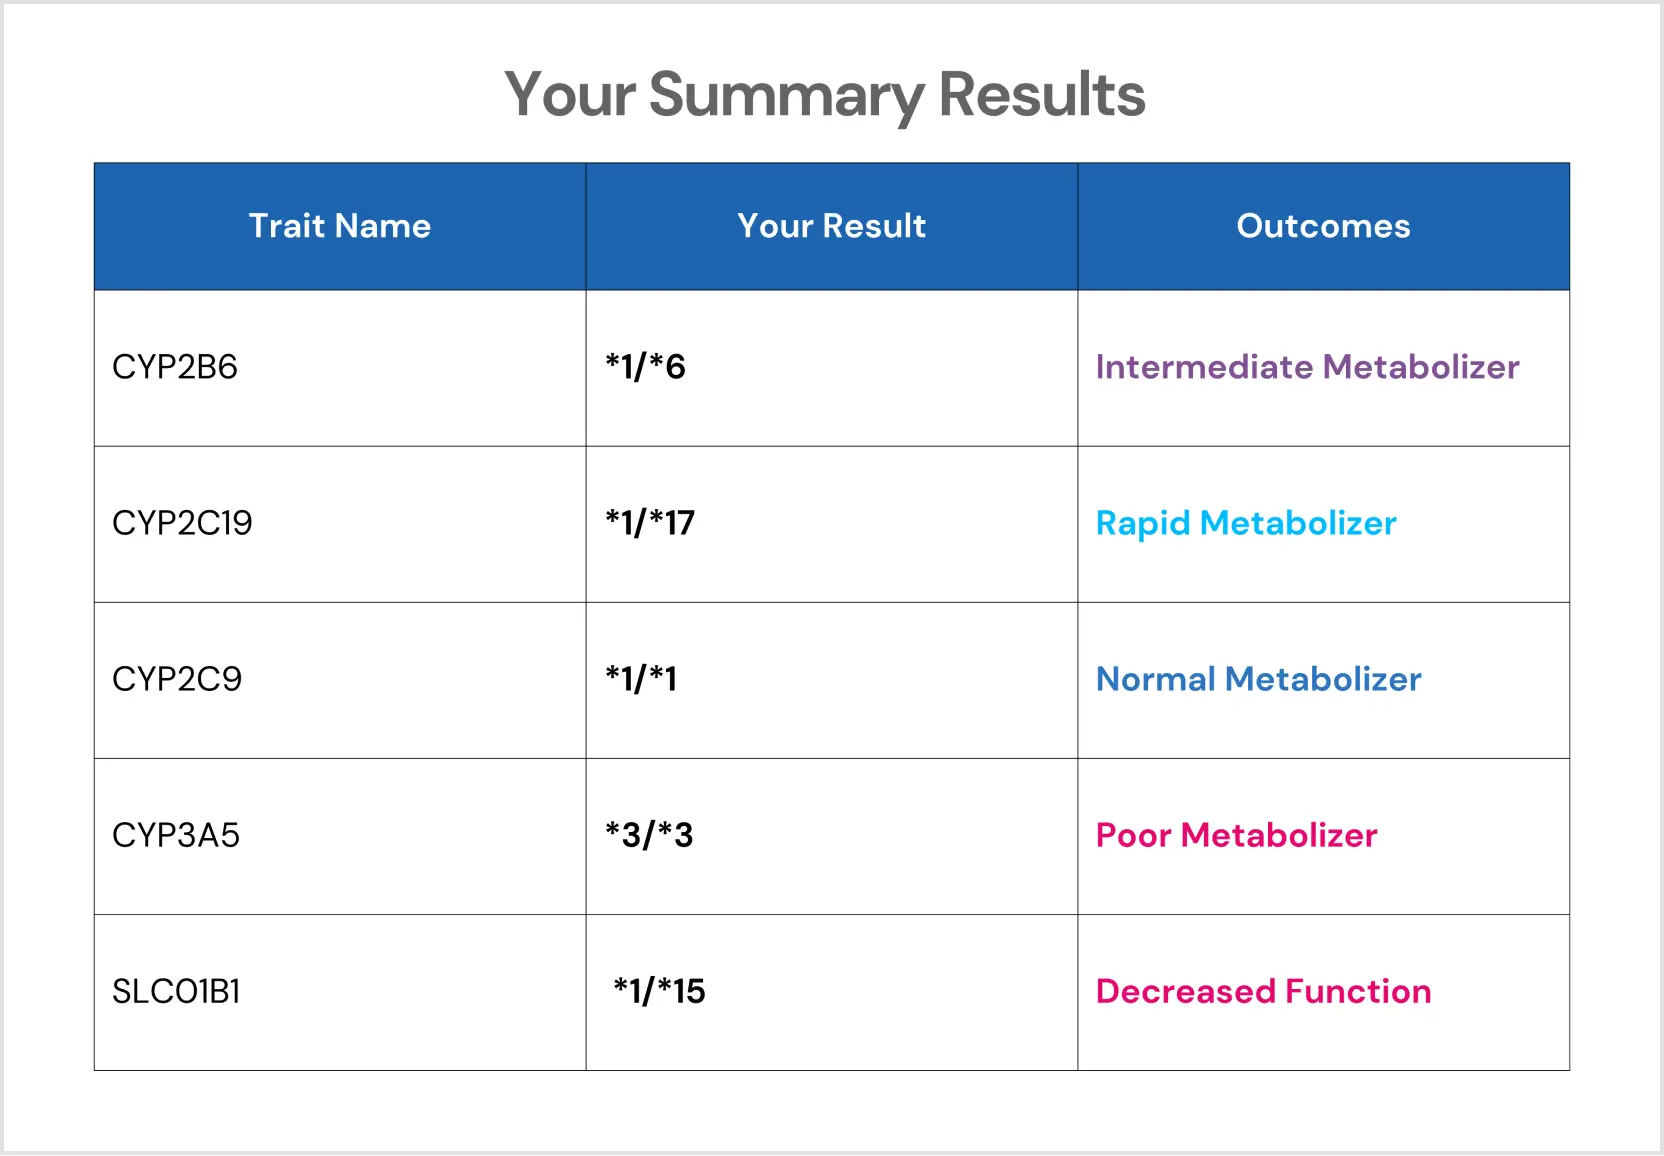 PGx your summary results